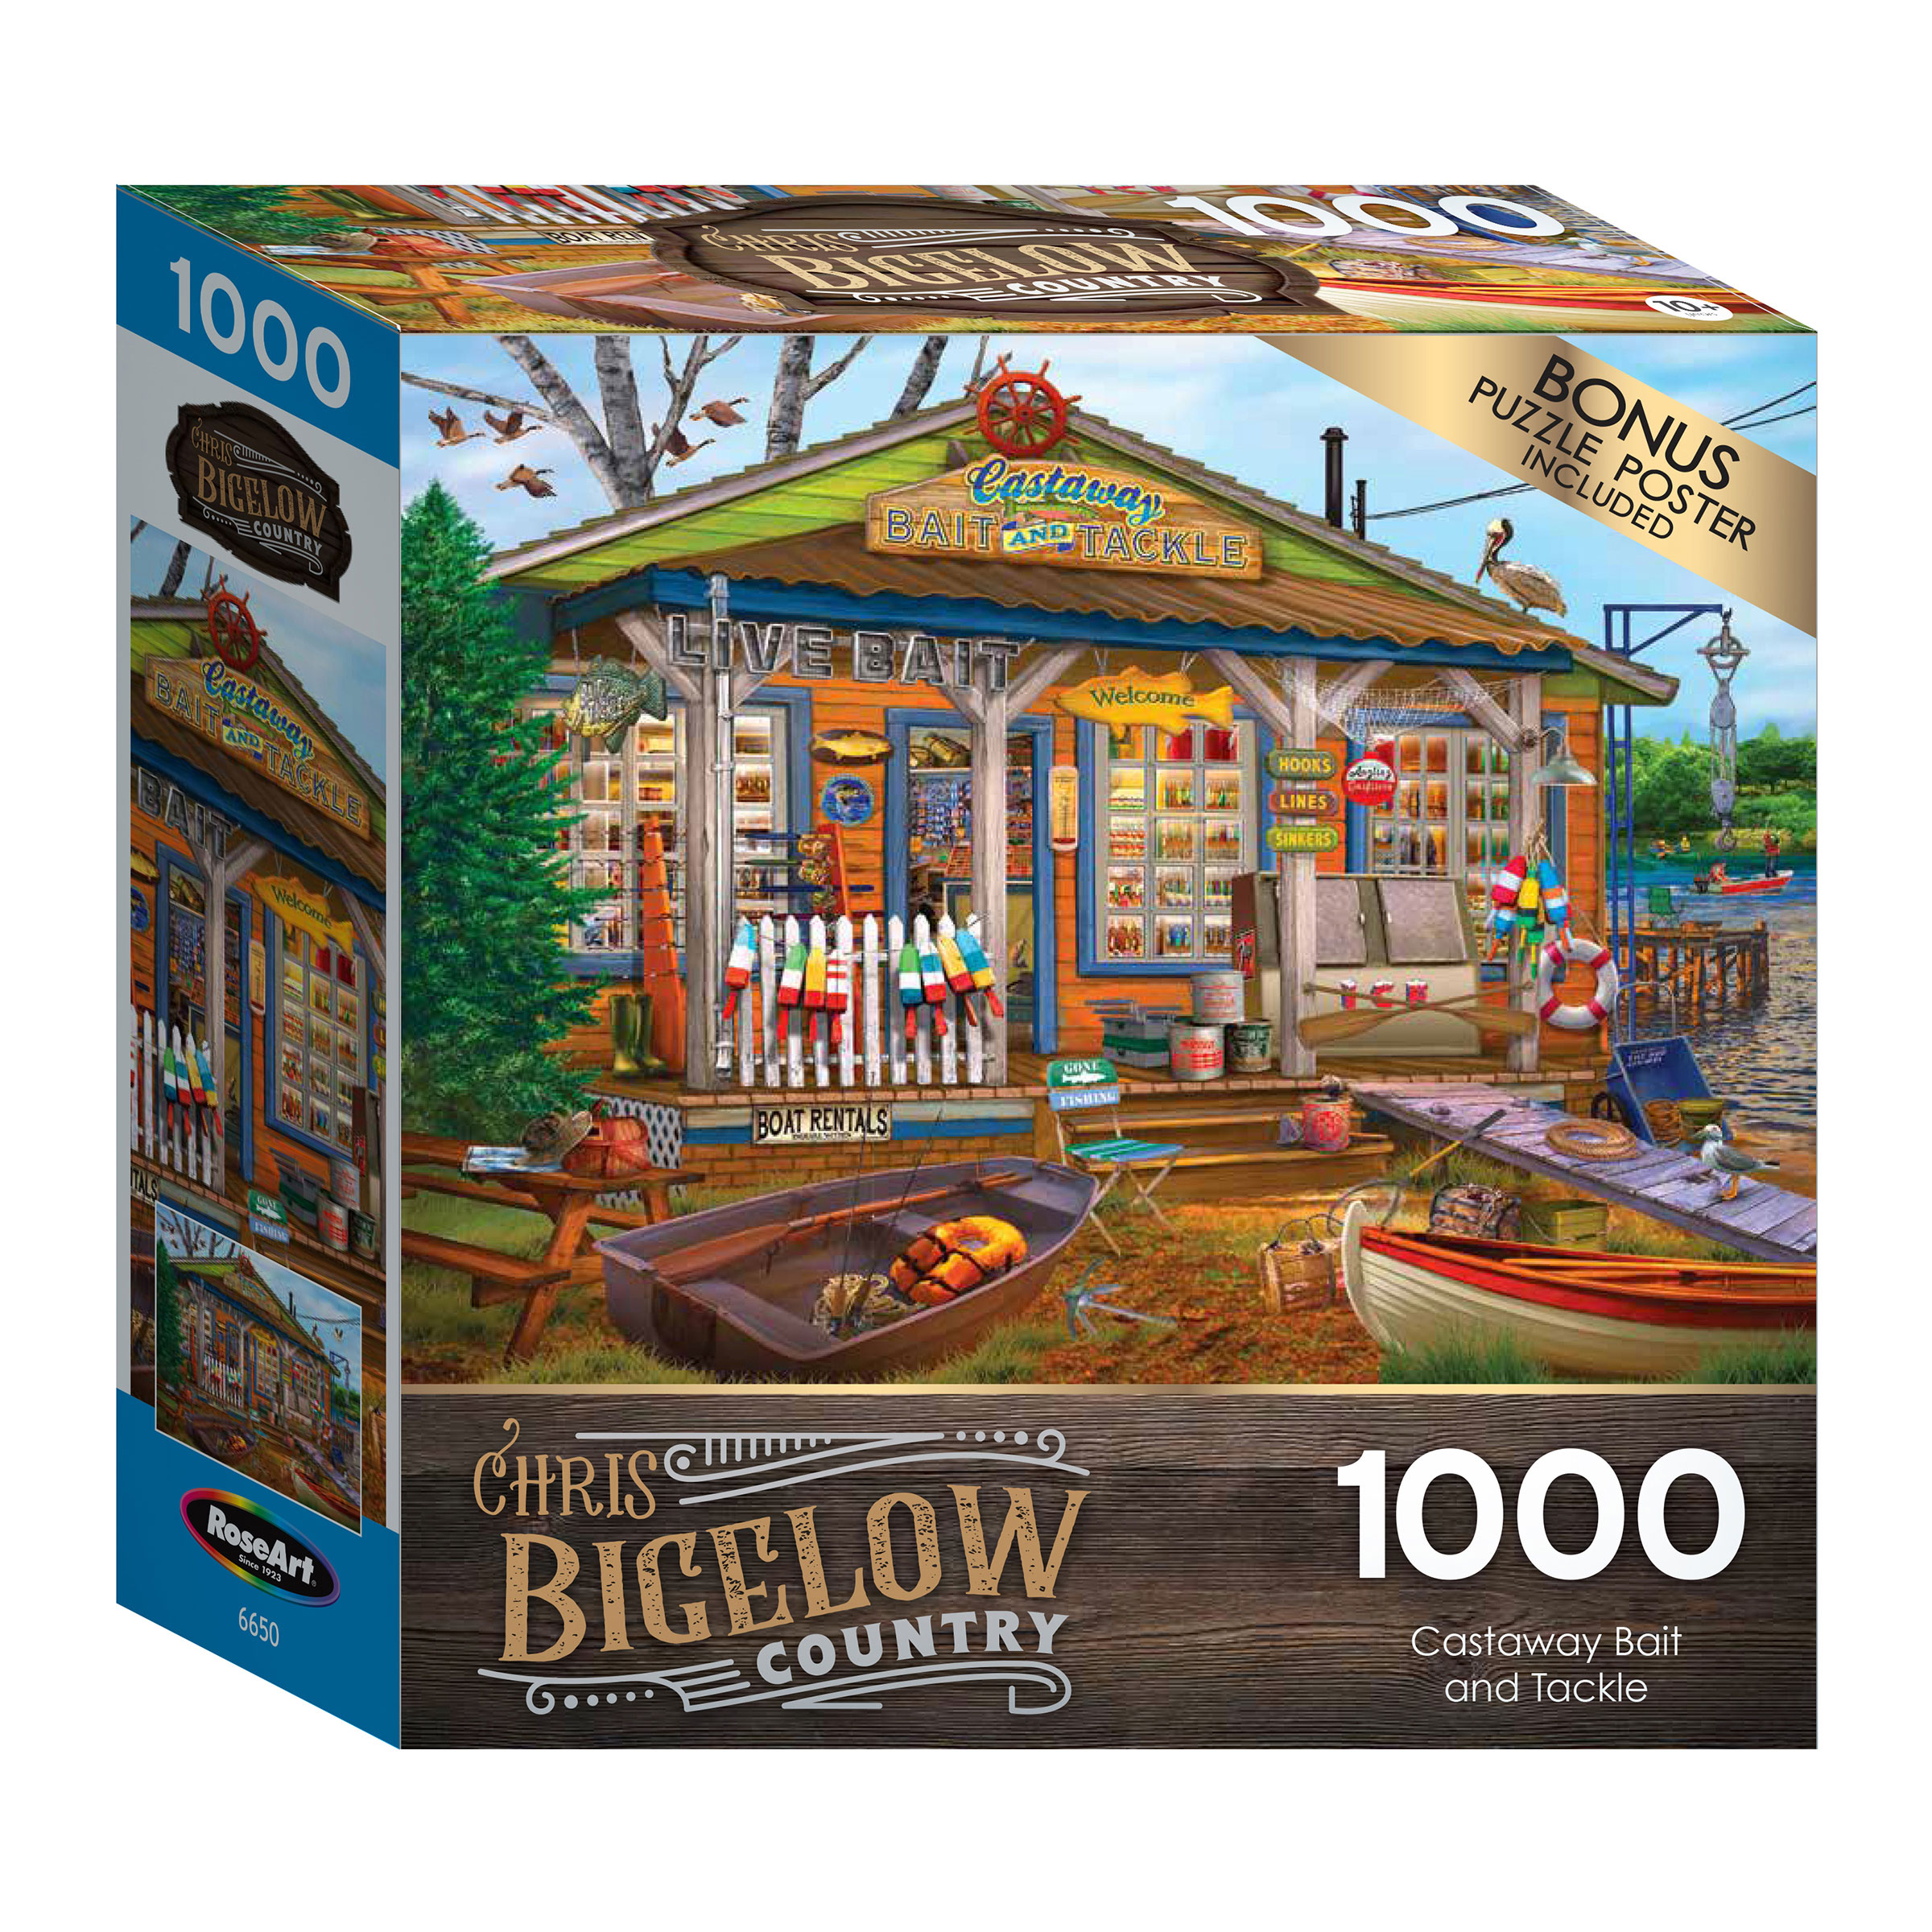 Bigelow Country 1000pc Puzzle